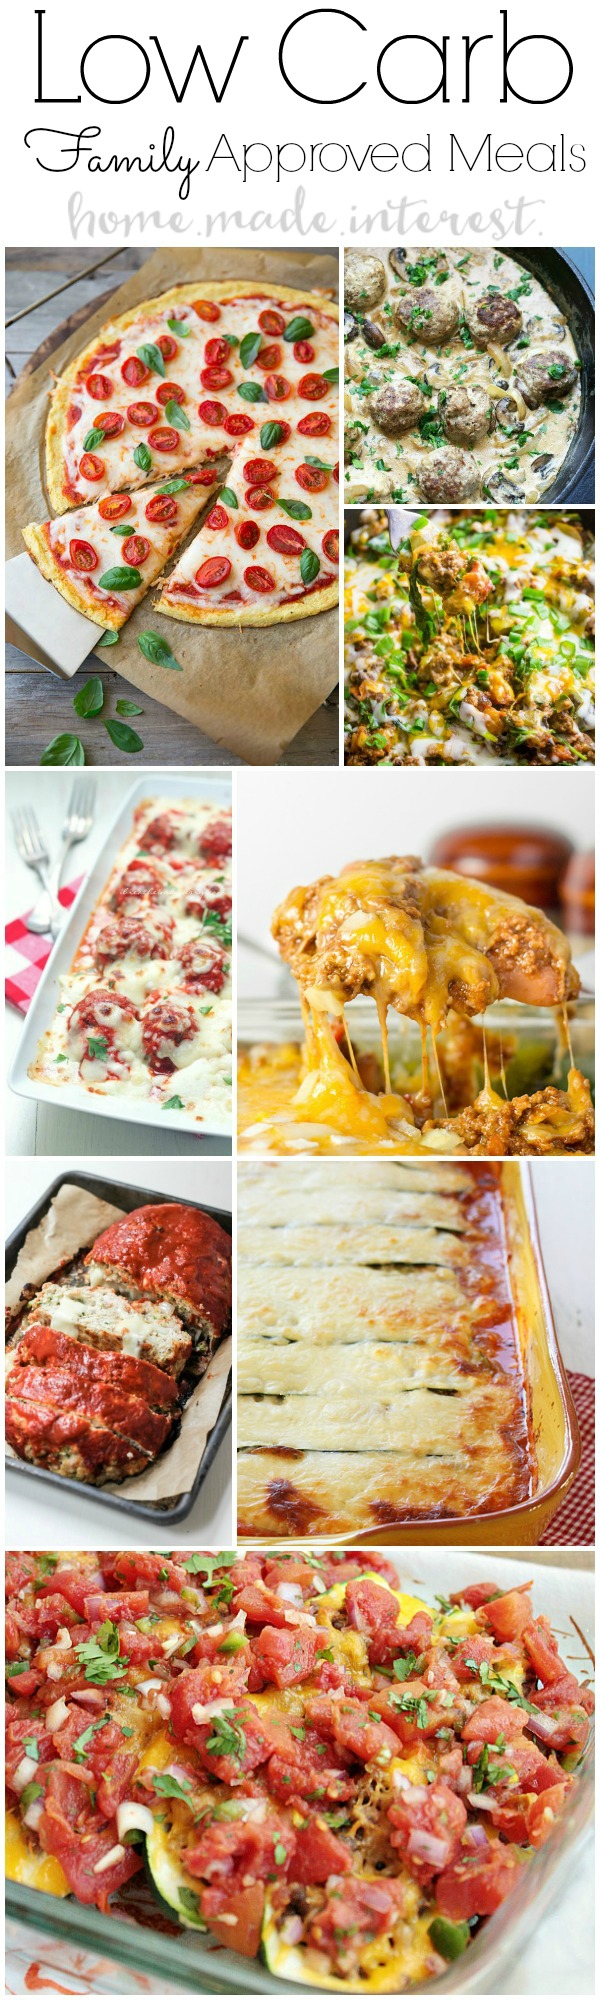 Low Carb dinner ideas that are kid and family approved. Healthy doesn't have to taste bad. Low carb diets and lifestyles are becoming very popular. Exercise and eat low is a great way to lose weight.Low carb dinner recipes for family will make meal time much easier!